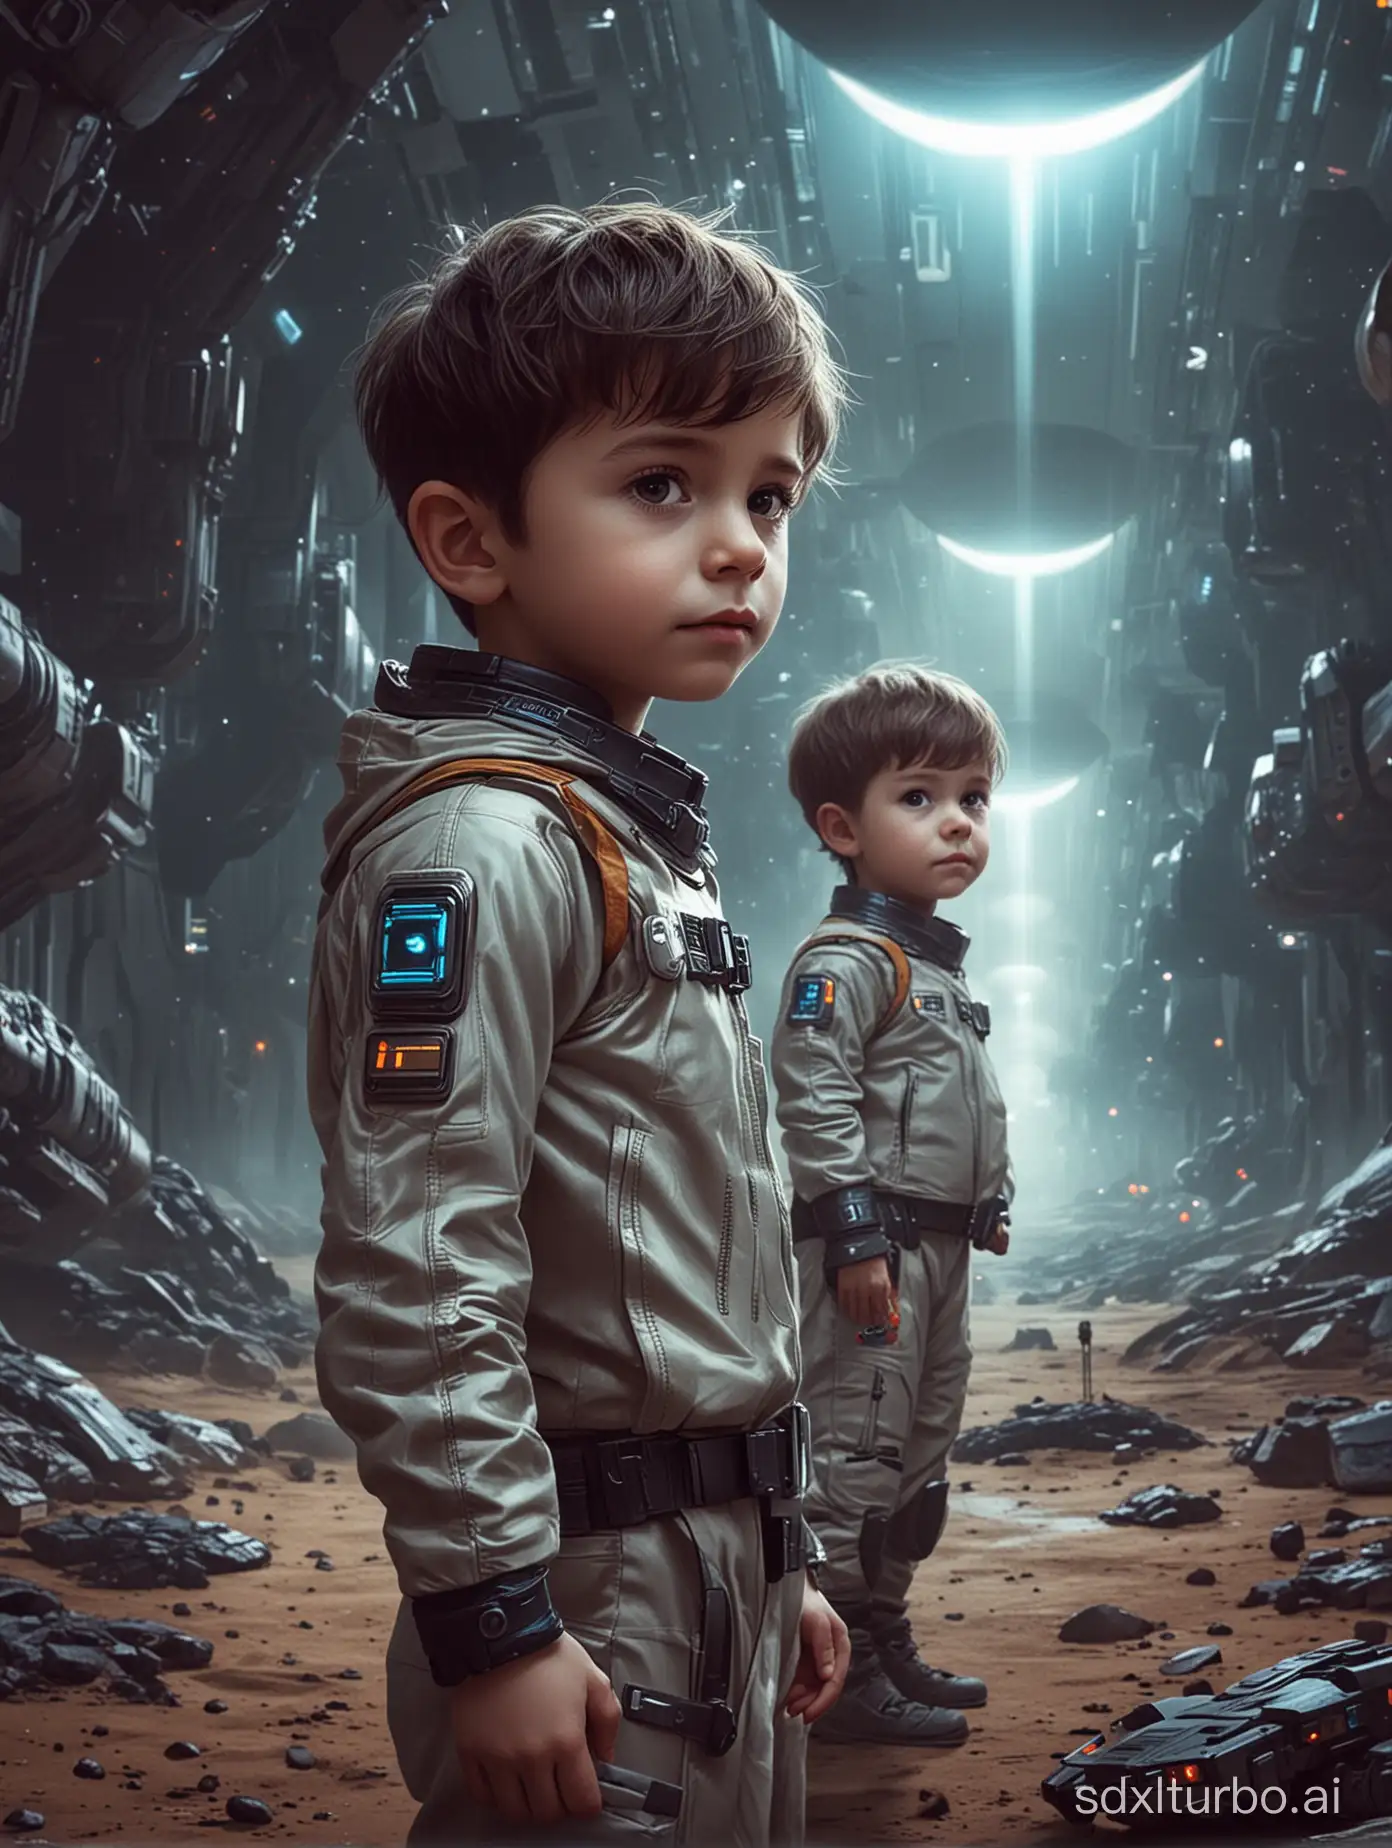 Young-Boys-Exploring-Futuristic-Space-Station